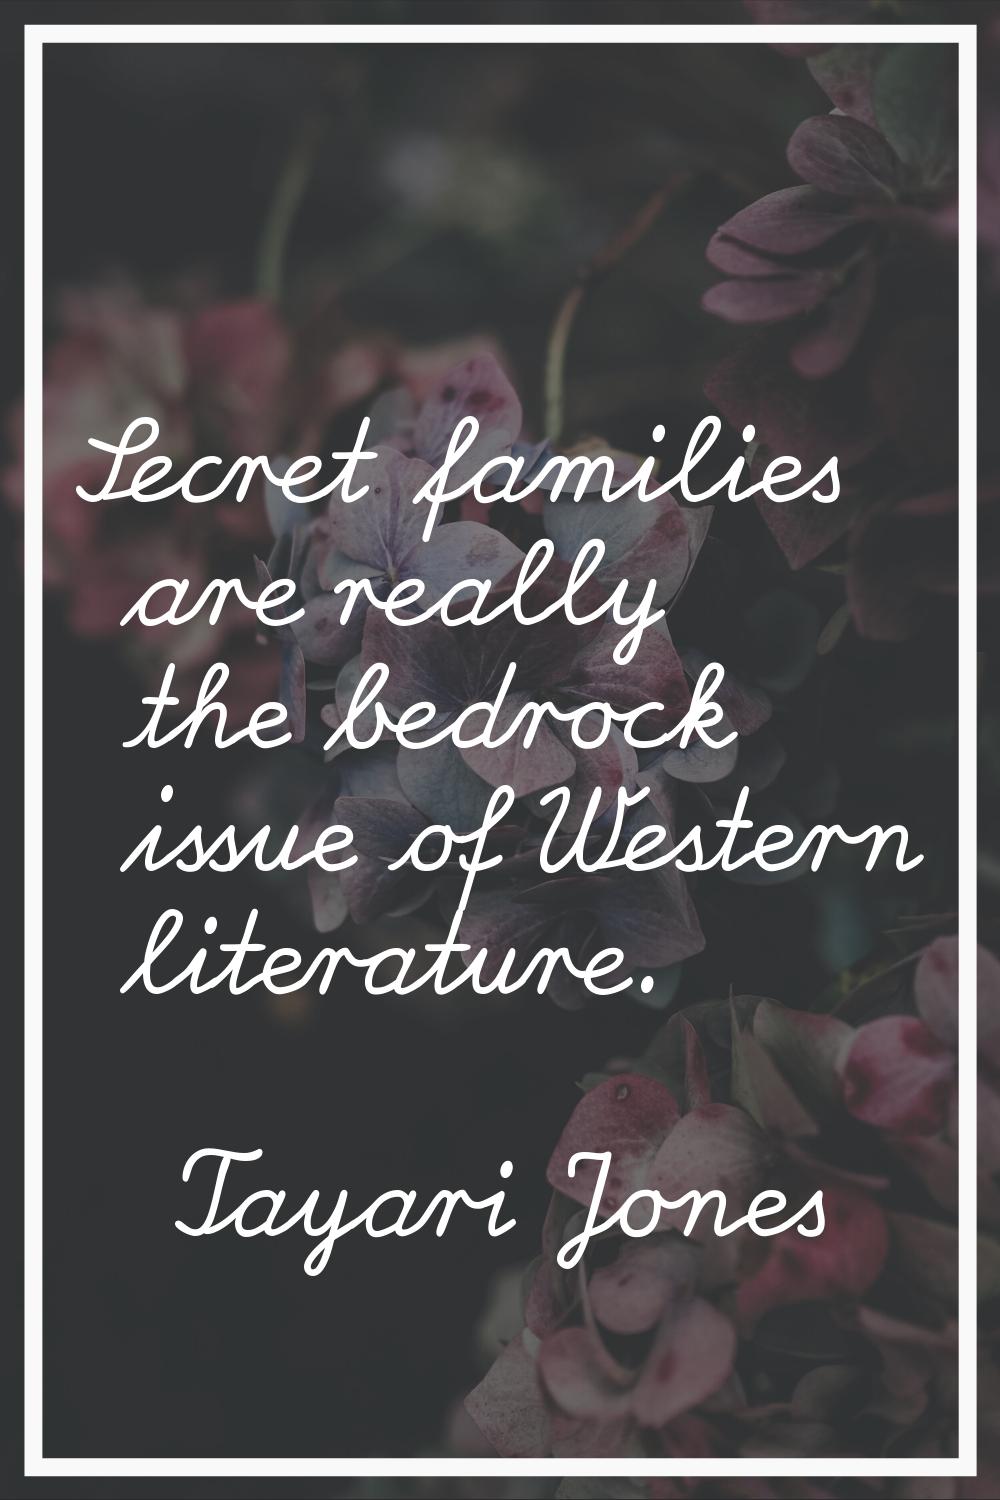 Secret families are really the bedrock issue of Western literature.